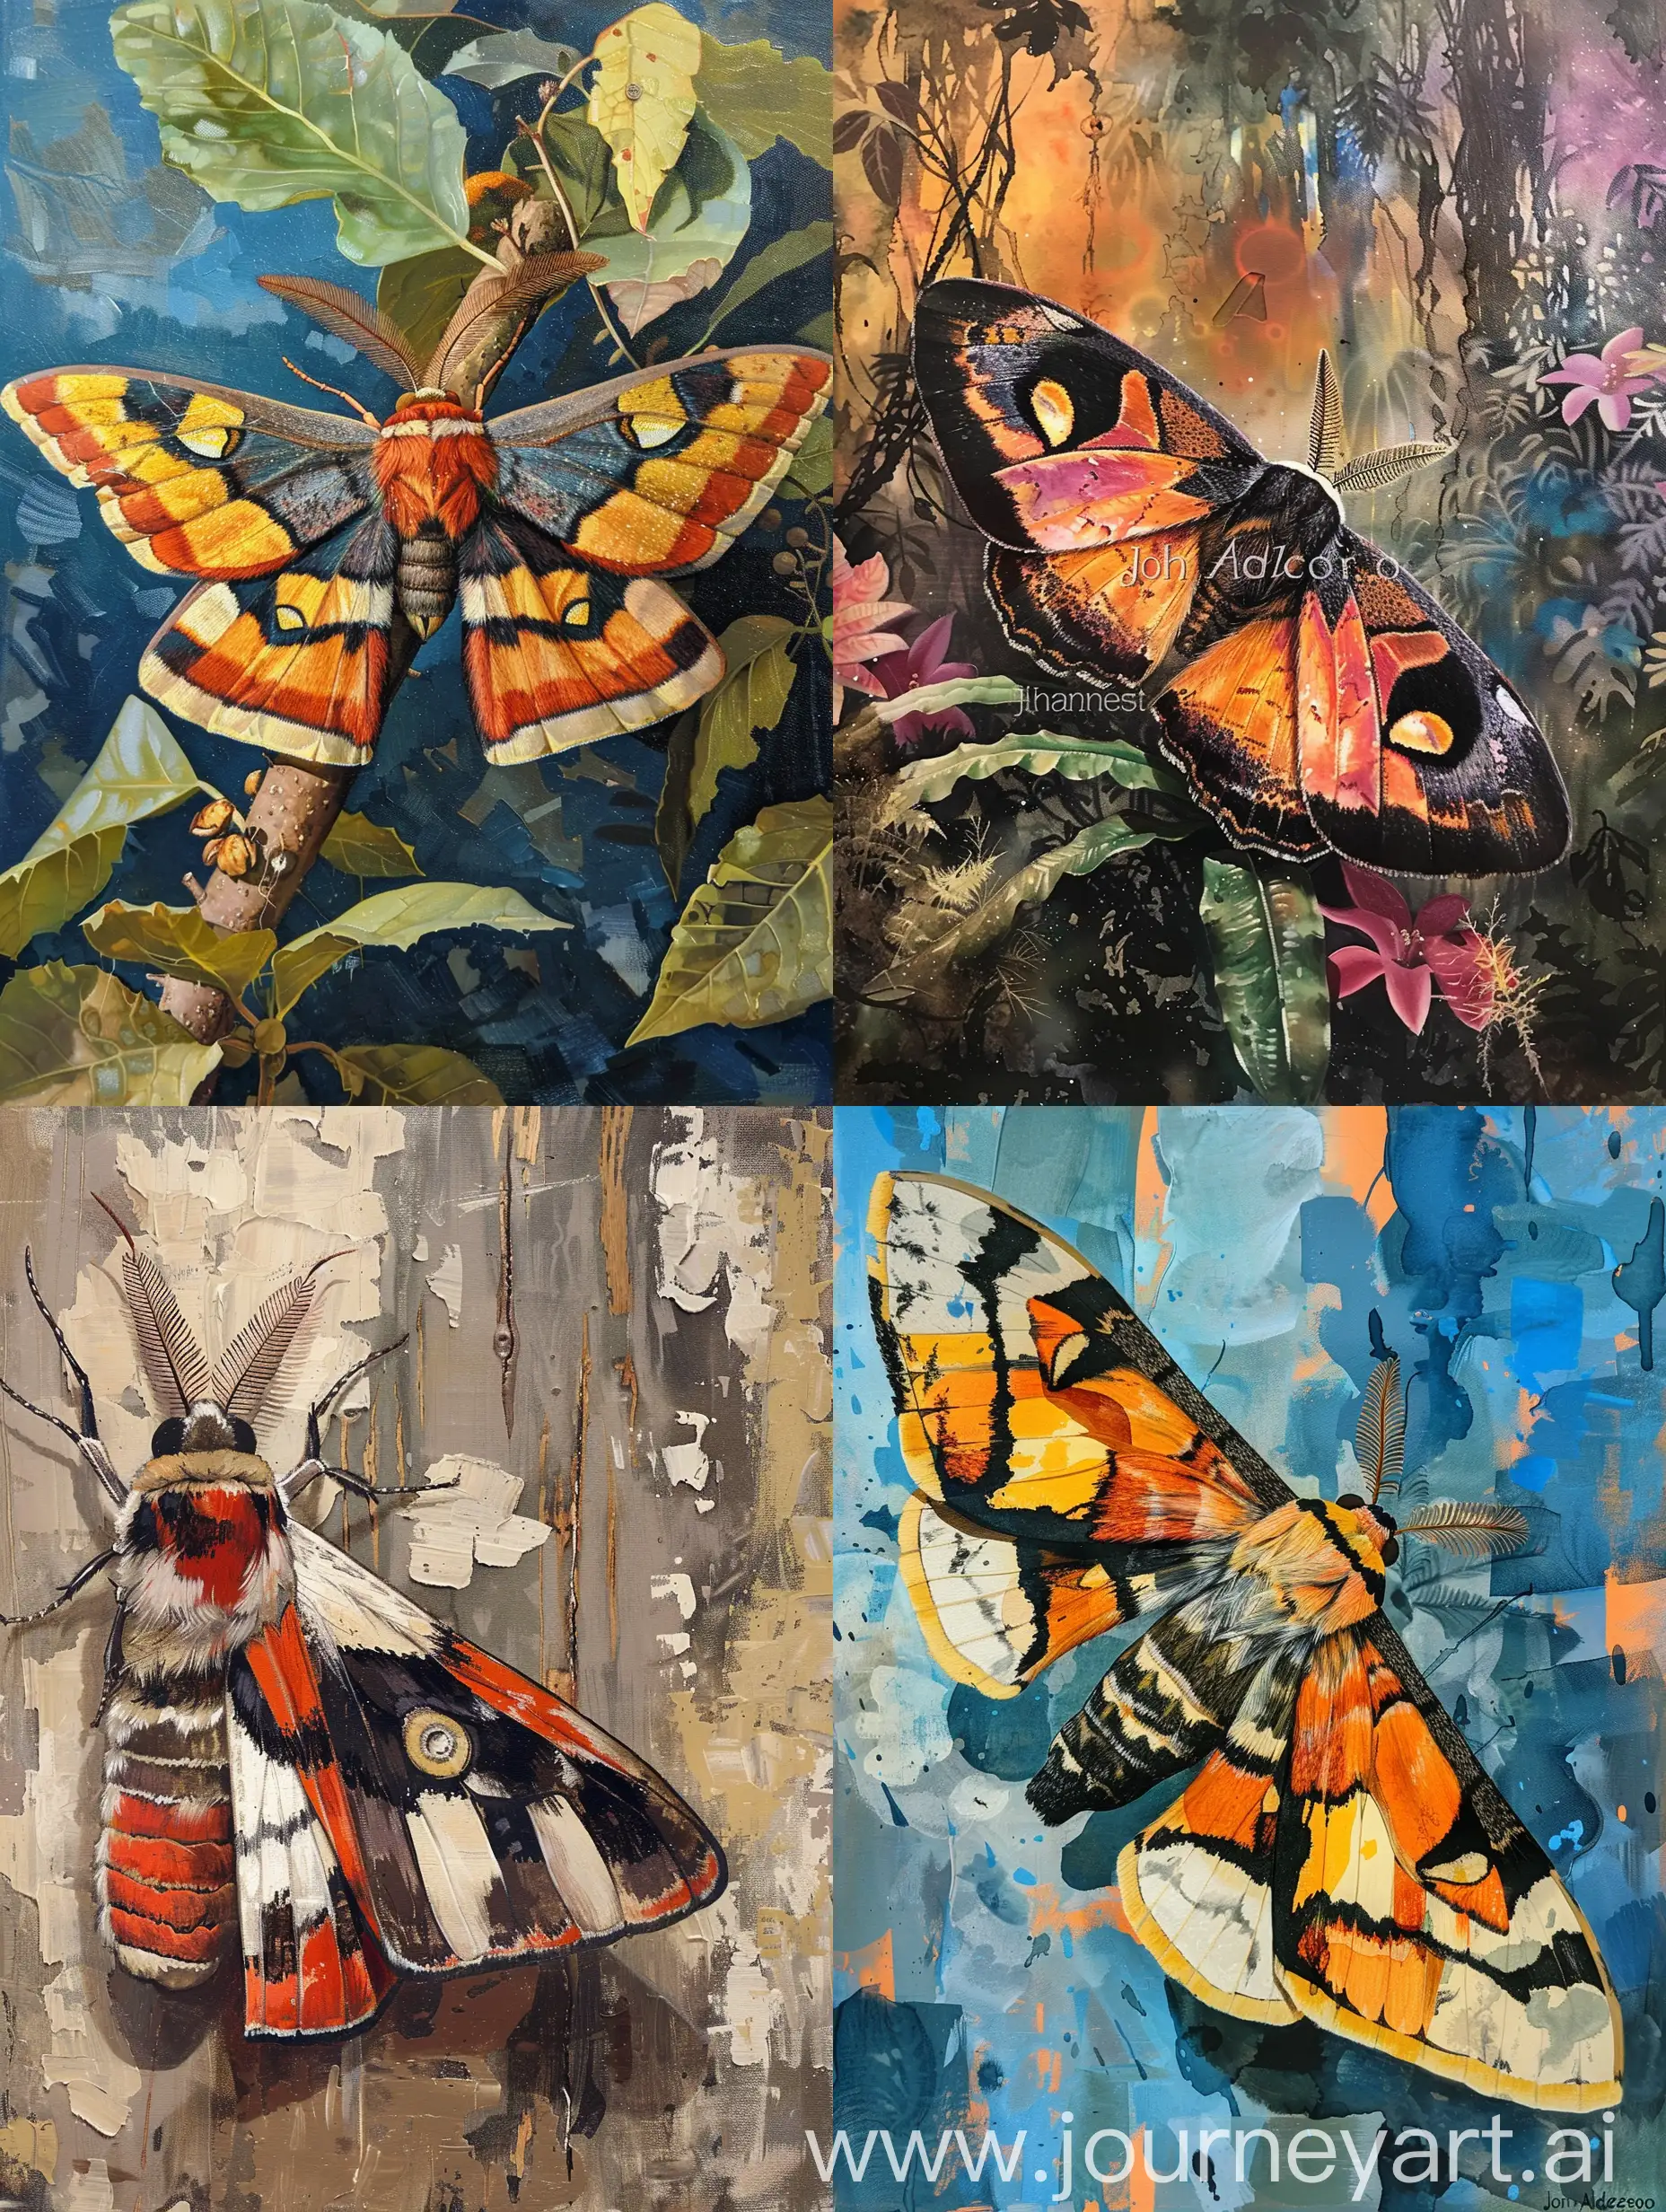 Majestic-Moth-Artwork-Inspired-by-John-Andersson